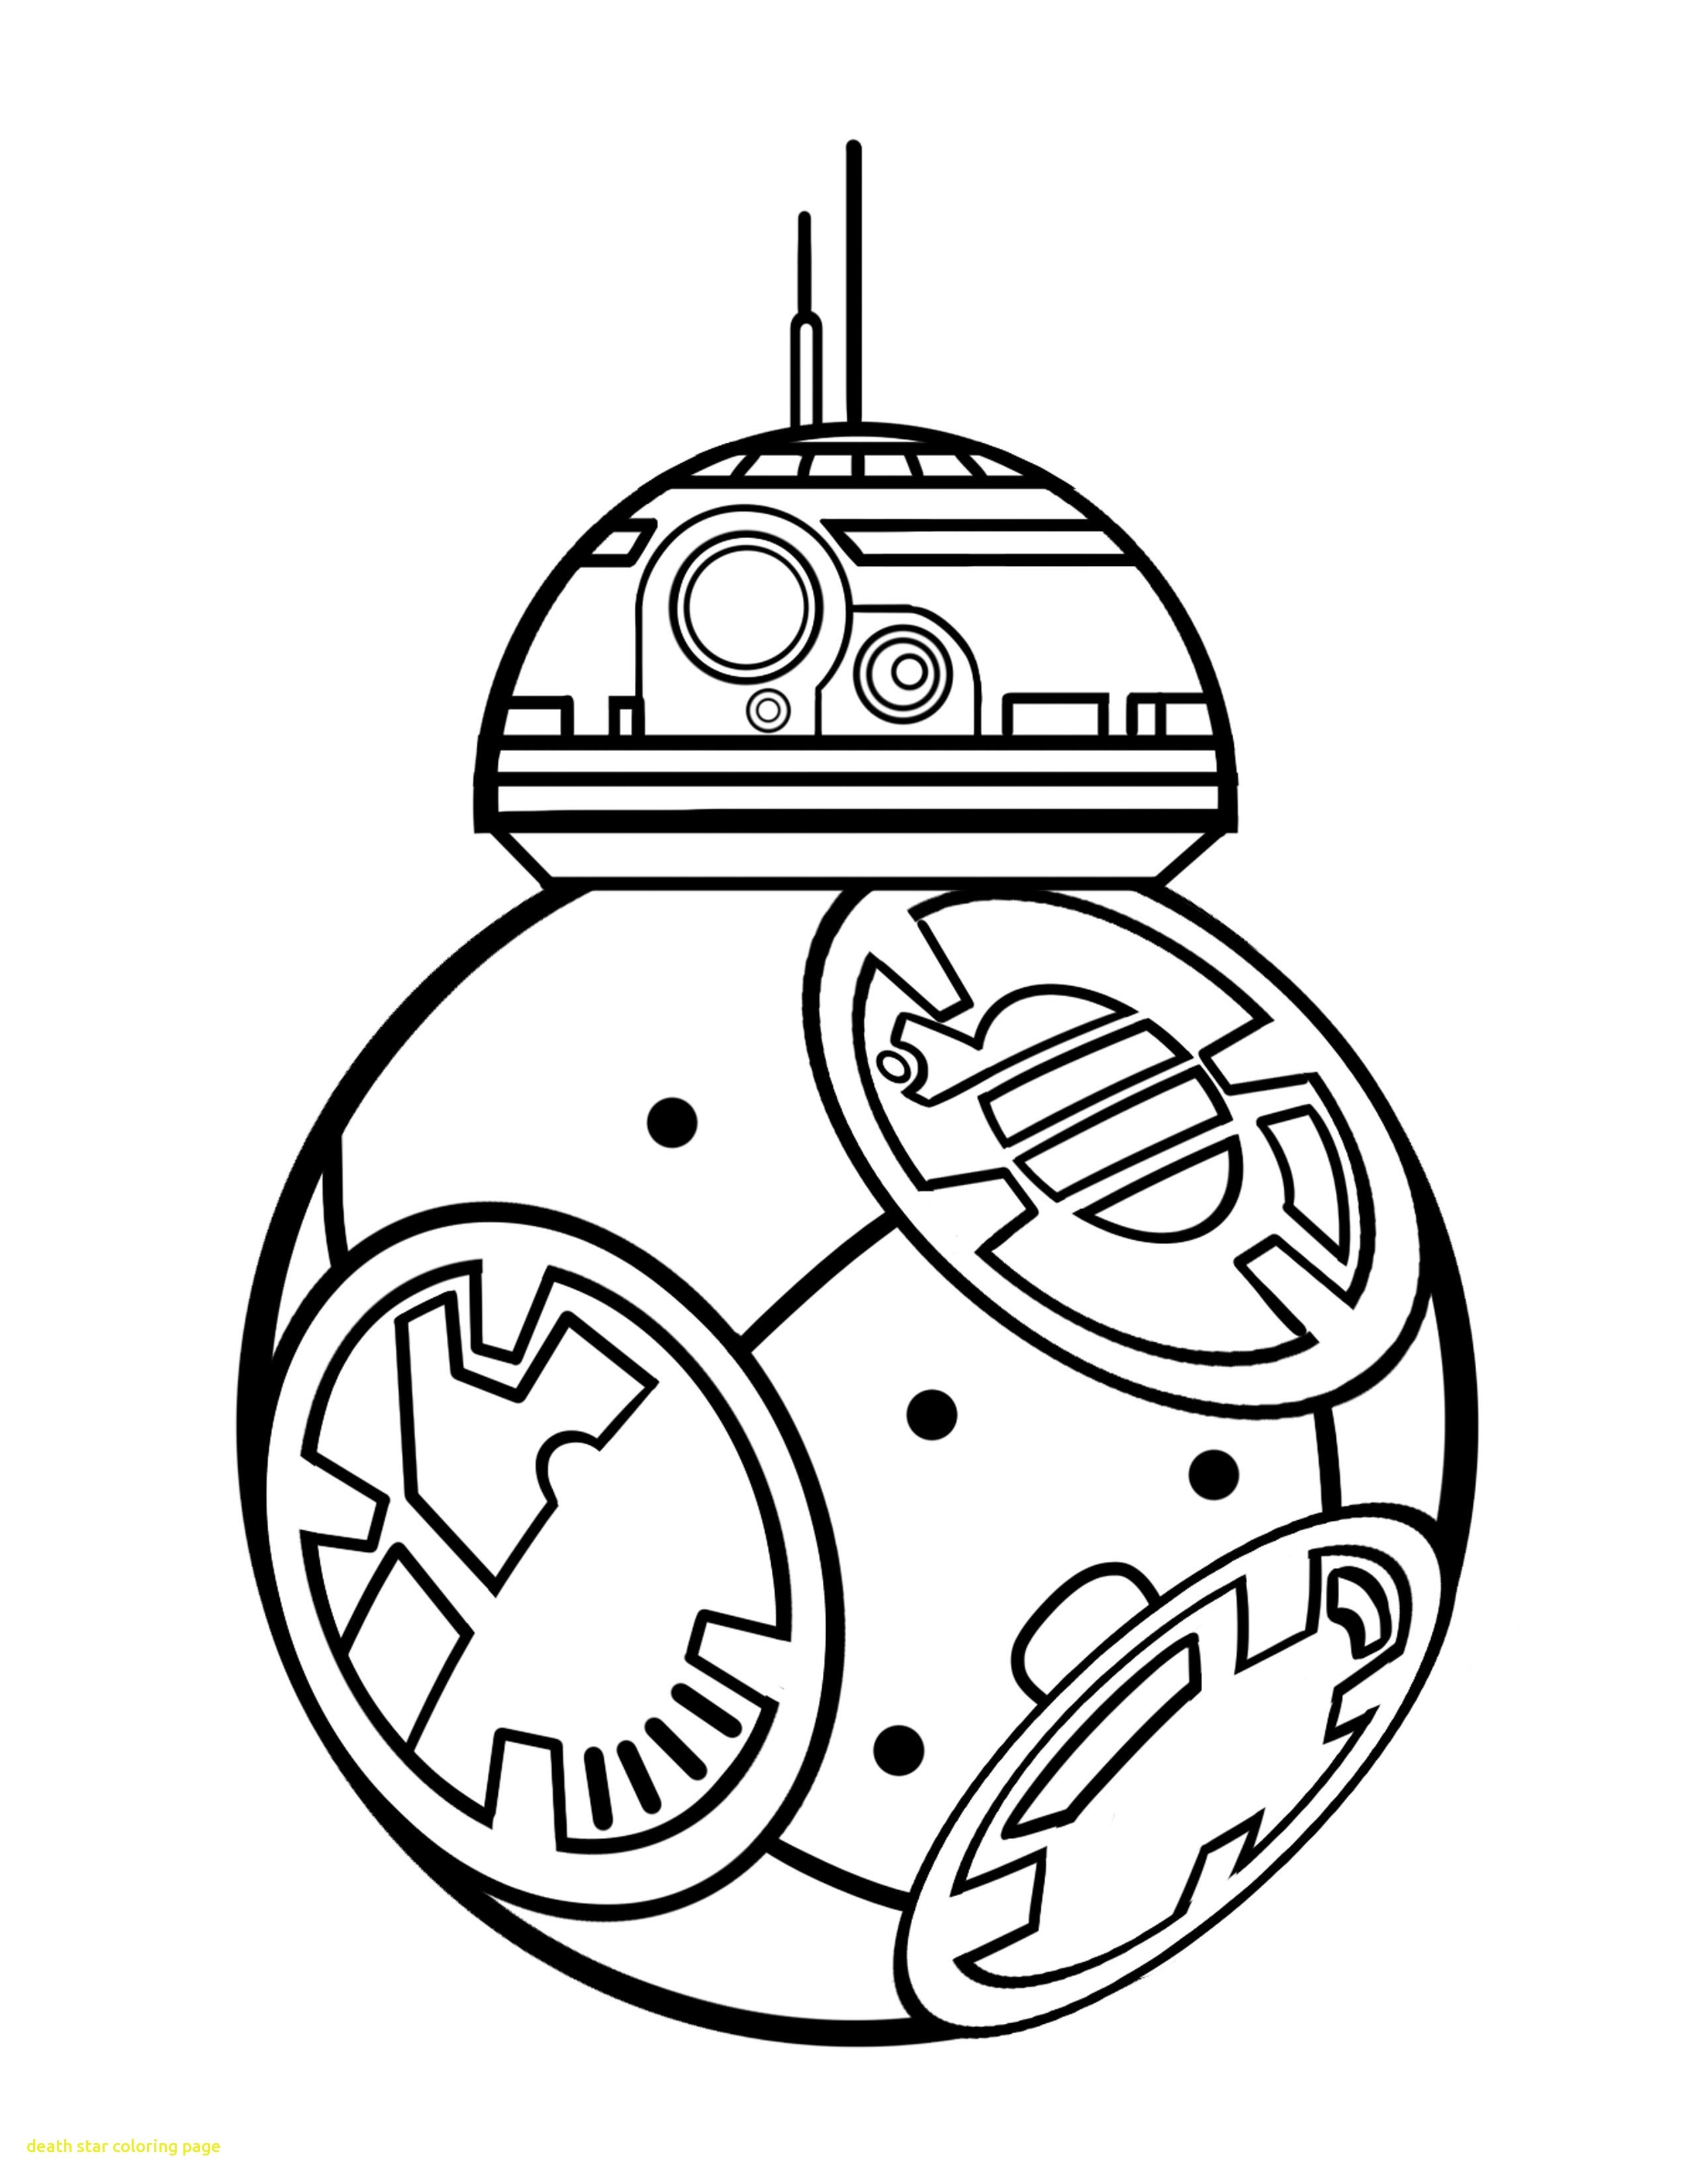 Tie Fighter Coloring Page at GetColorings.com   Free printable ...